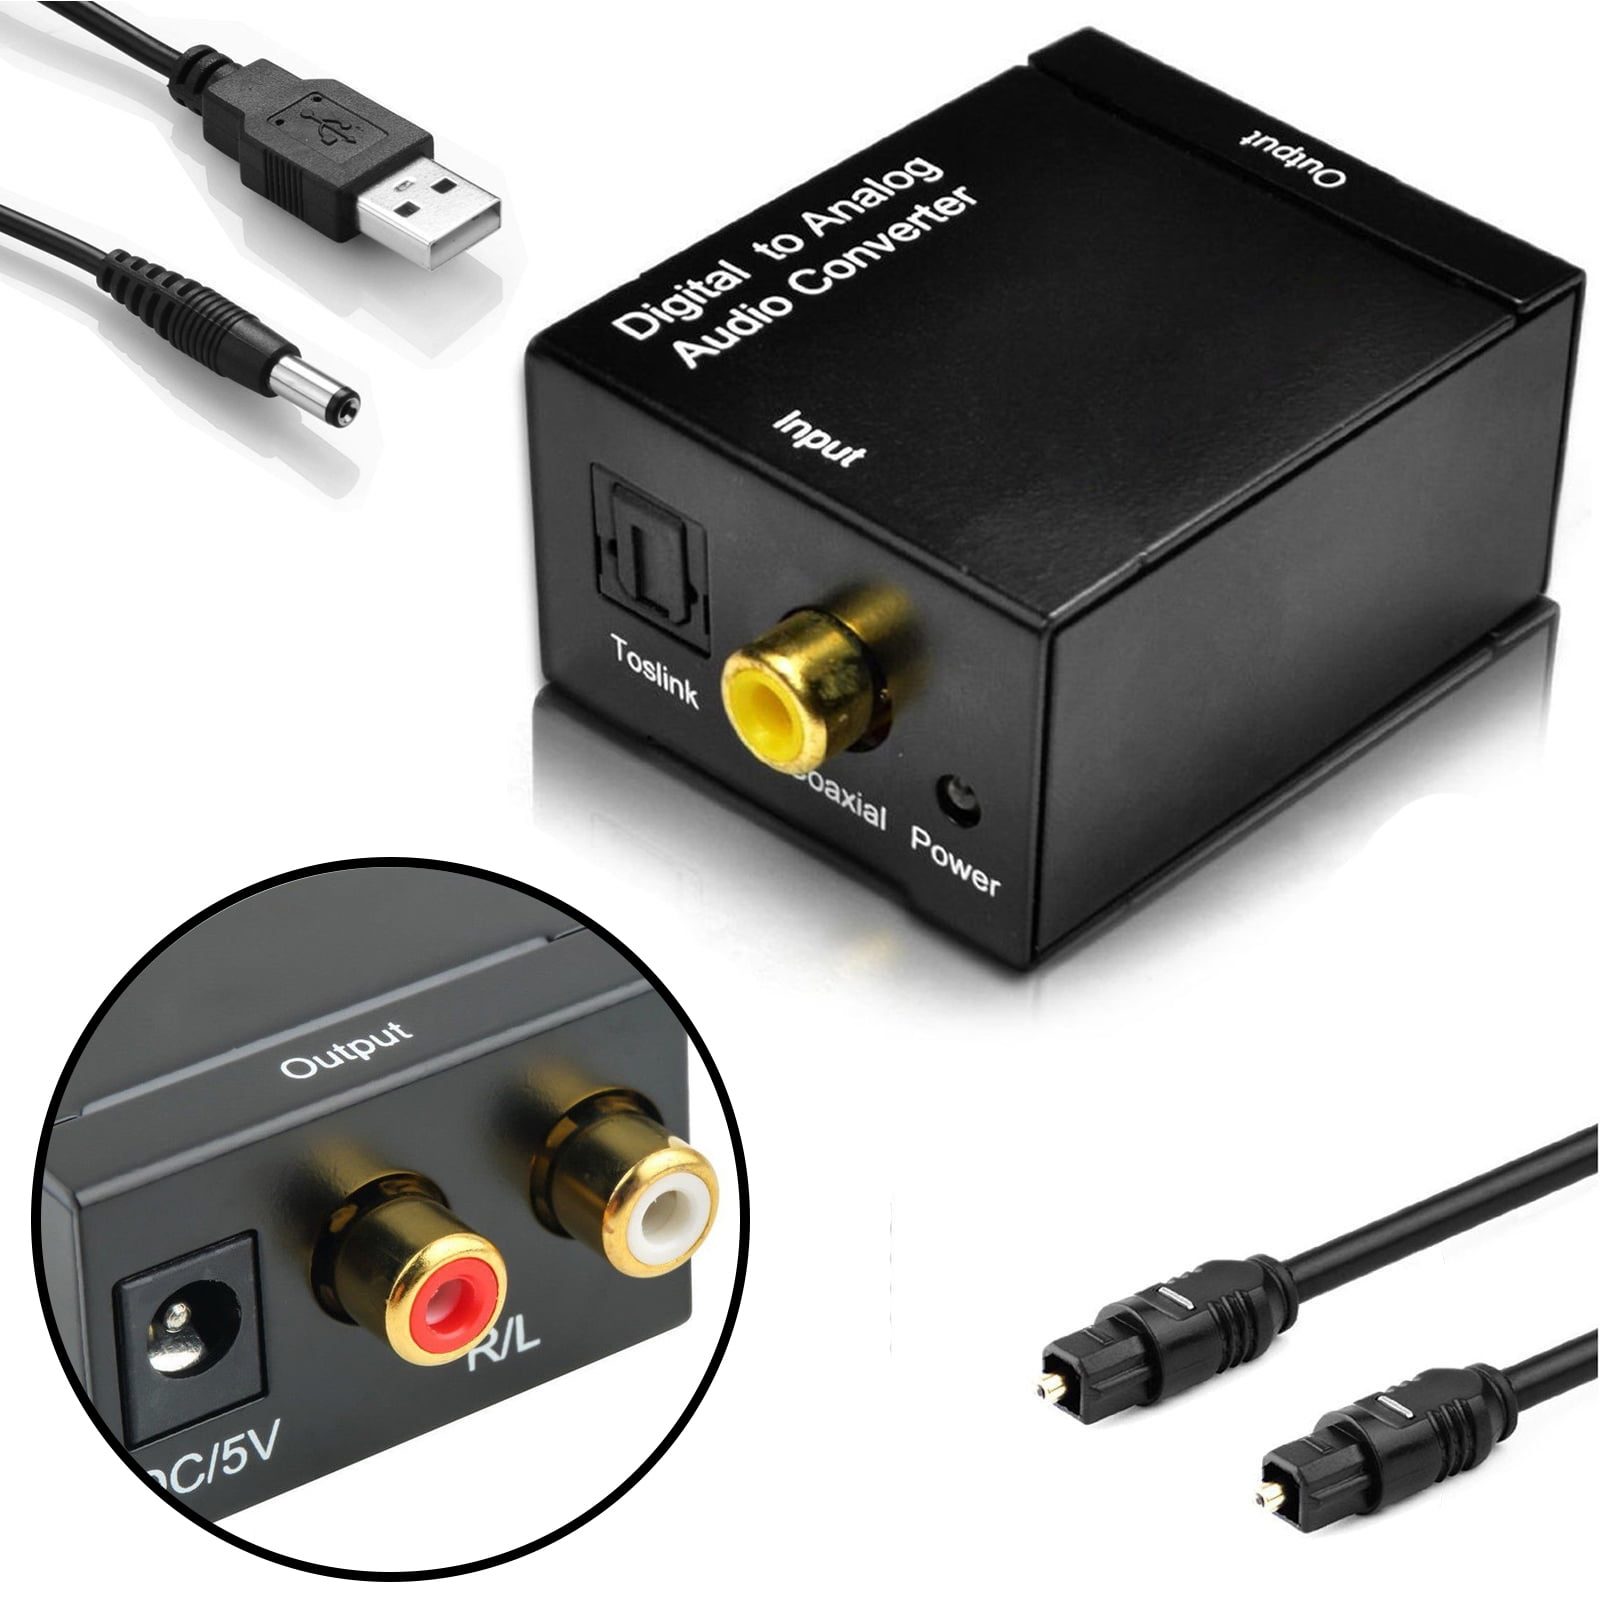 Optical Digital Stereo SPDIF Toslink Coaxial Signal to Analog Adapter C